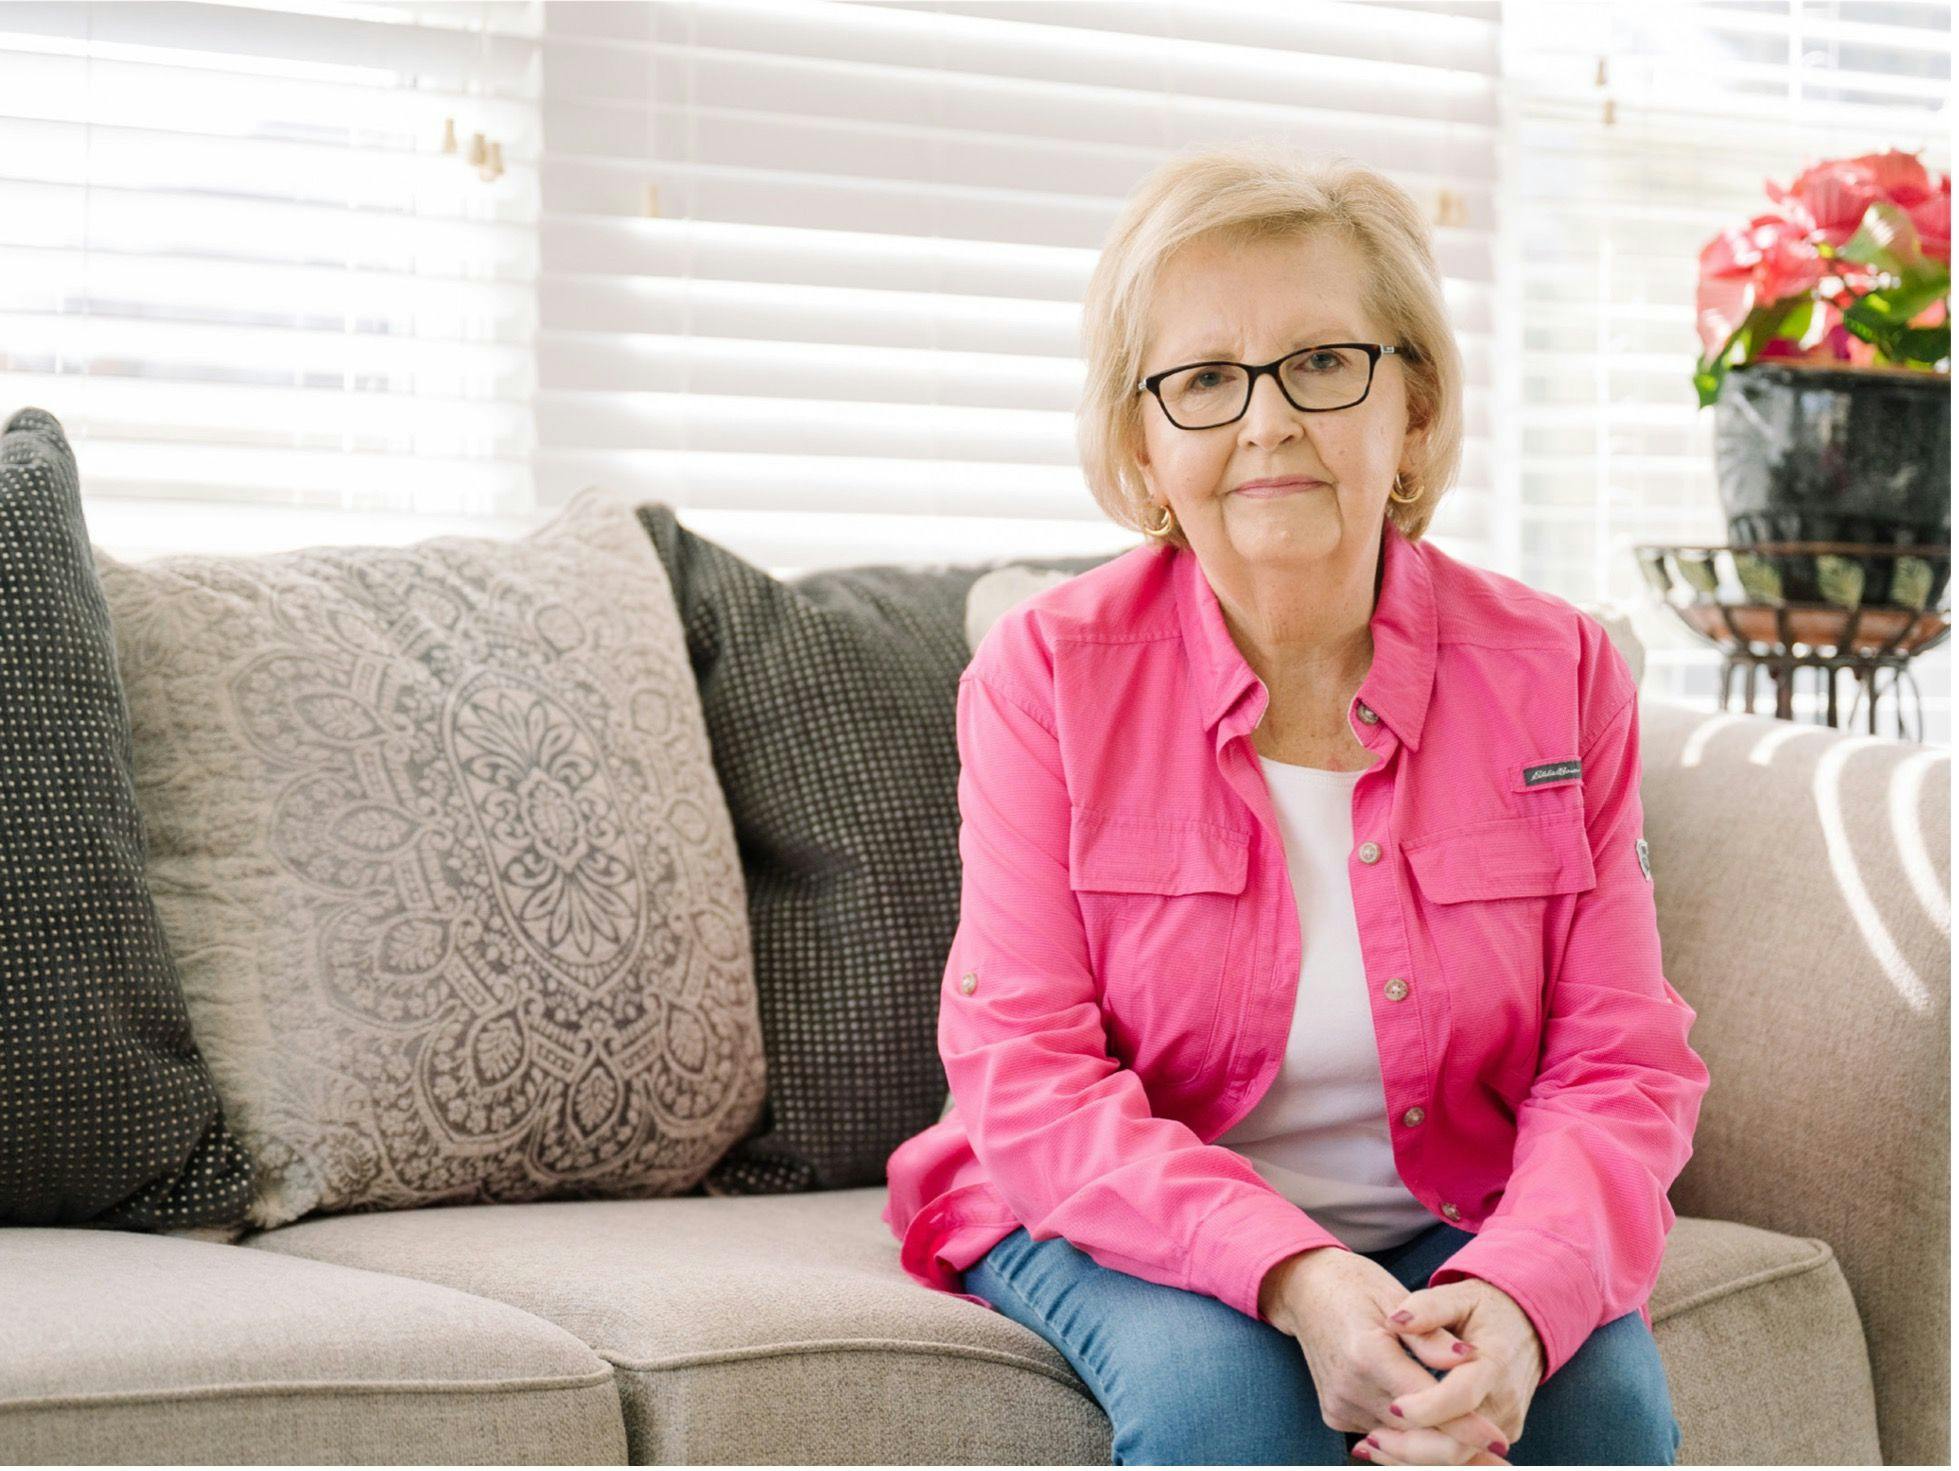 Brenda Duggins sitting on the couch, wearing a pink shirt